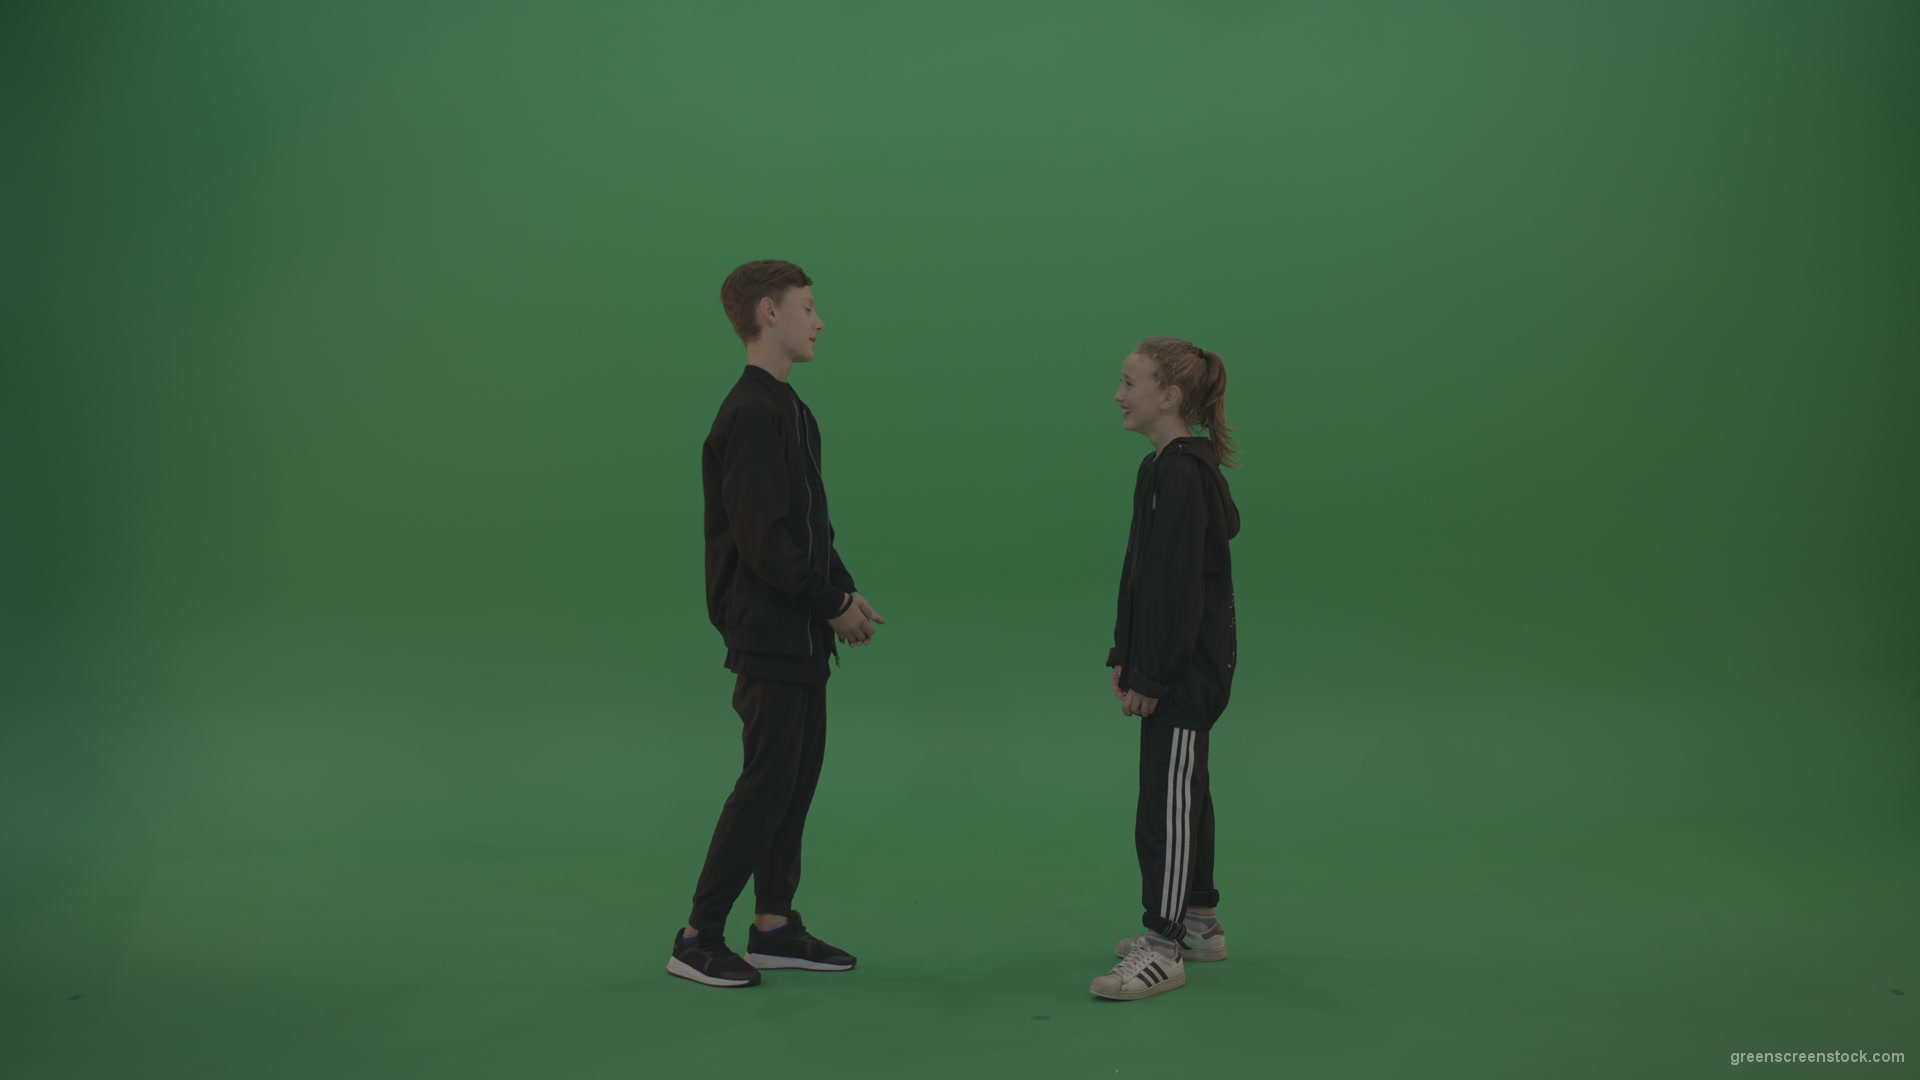 Boy-in-black-wear-talks-to-girl-over-chromakey-background_005 Green Screen Stock